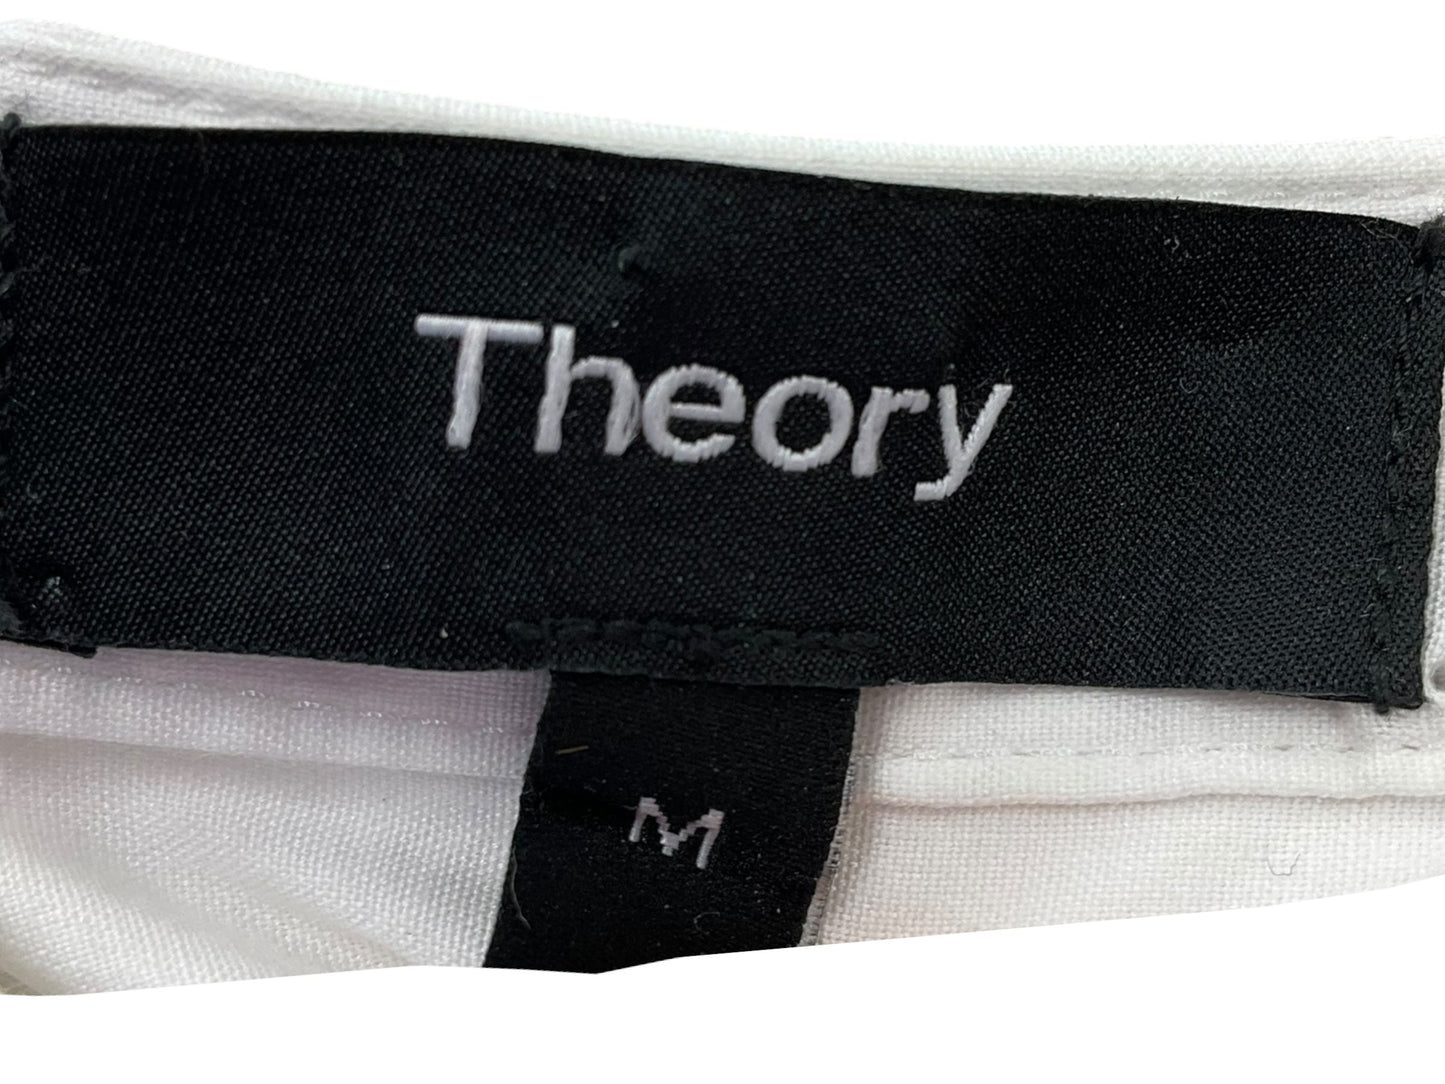 White Top Long Sleeve Theory, Size M